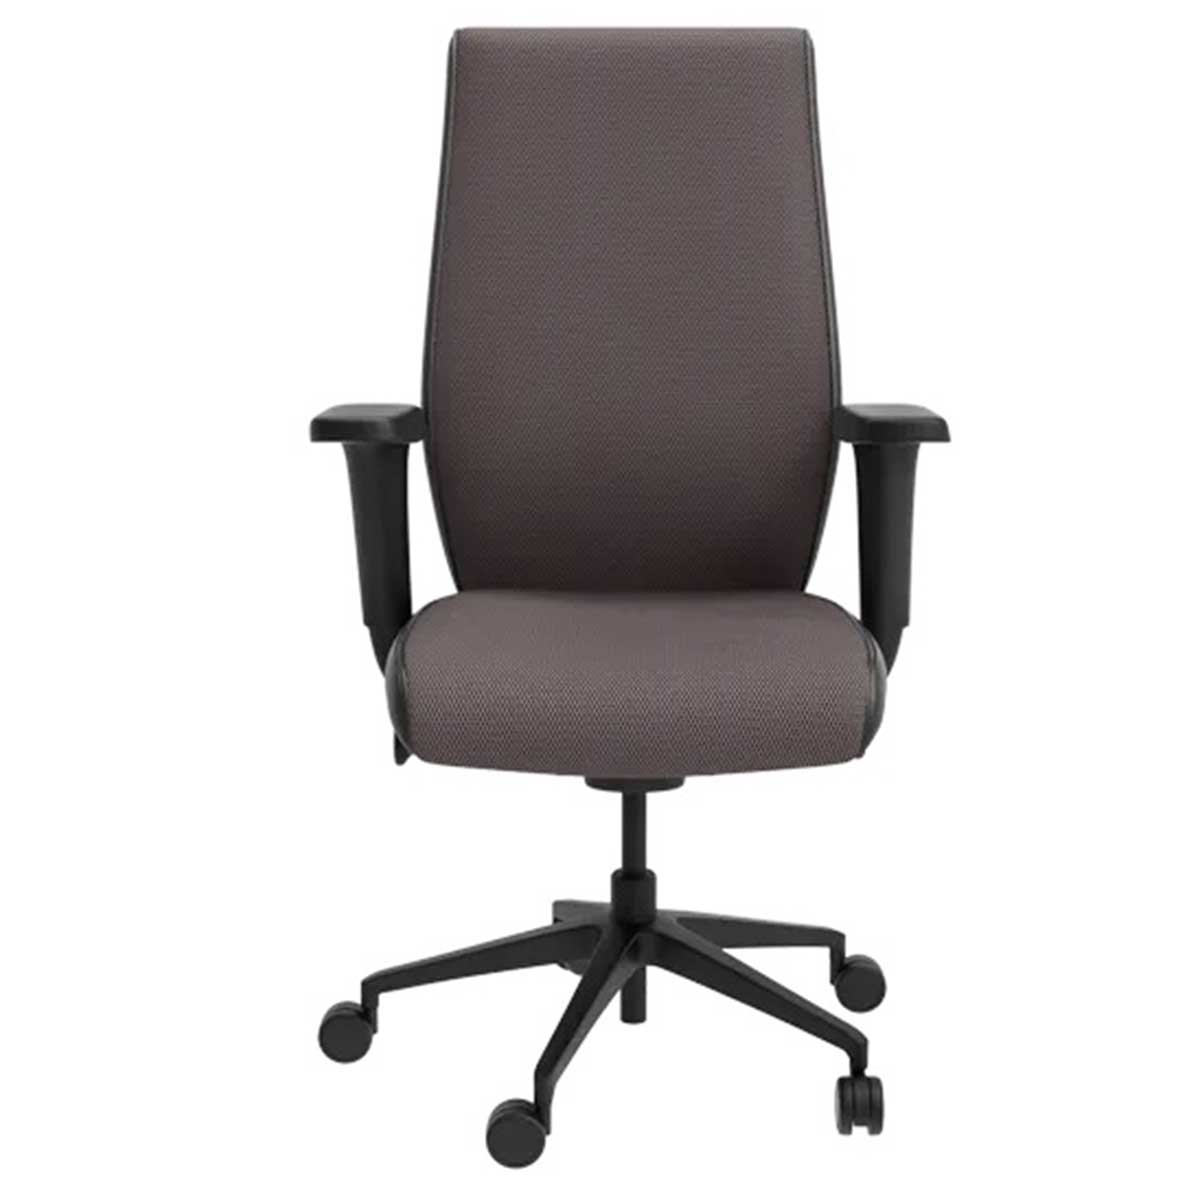 Workstation Chair Manufacturers, Suppliers in Dwarka Sector 16 B